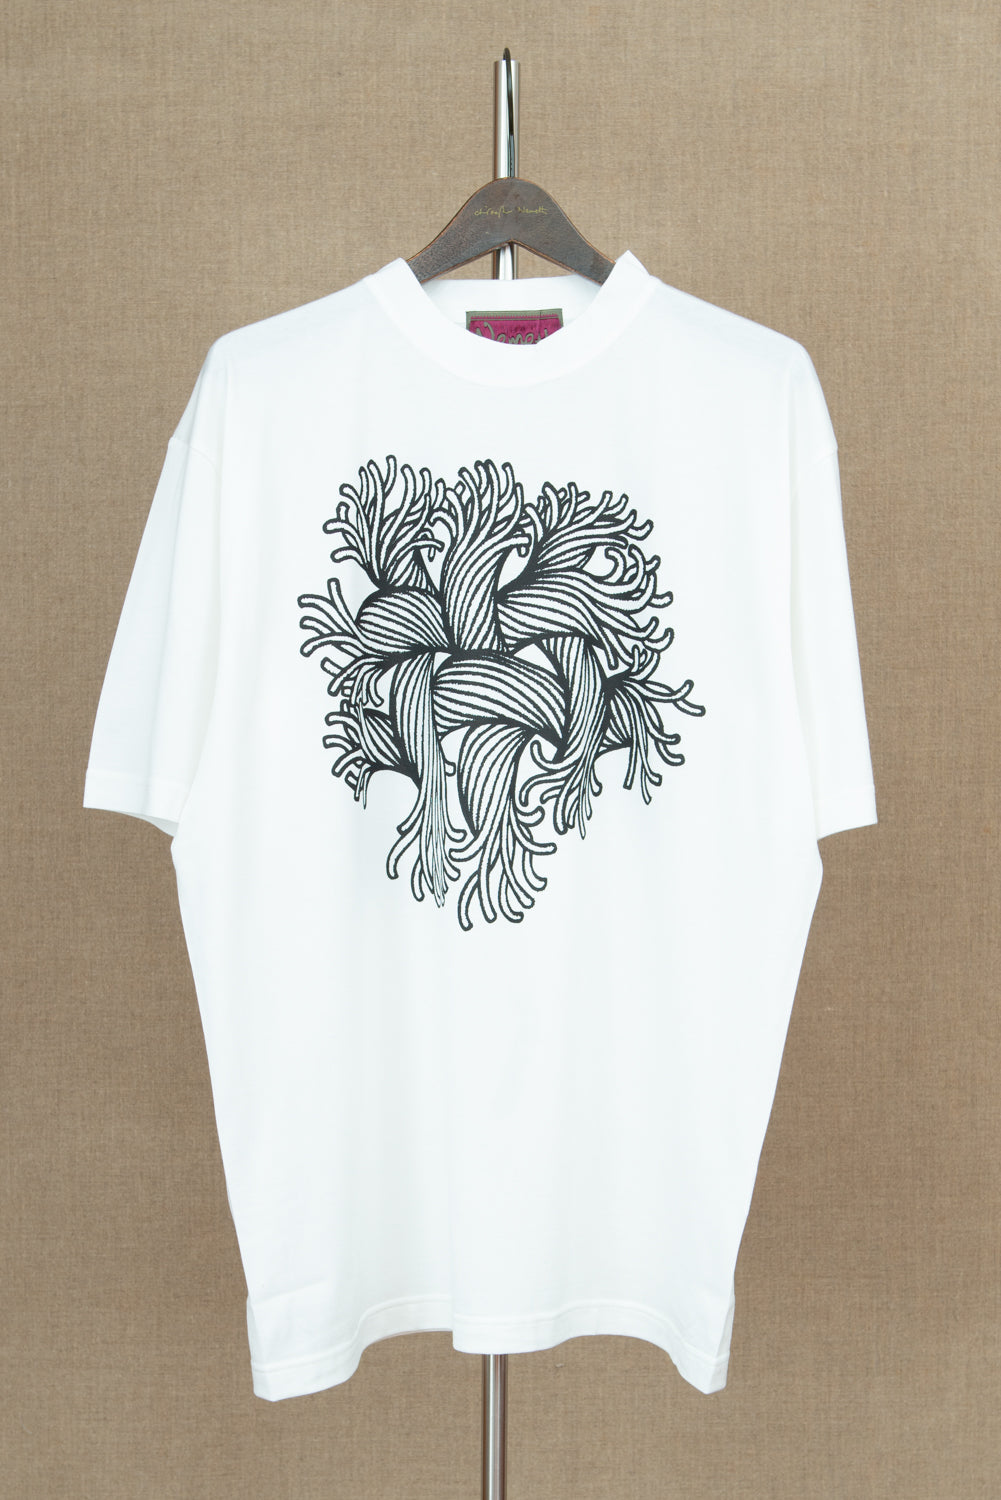 Tshirt Printed- Cotton100% Jersey- Embroidery Rope- White